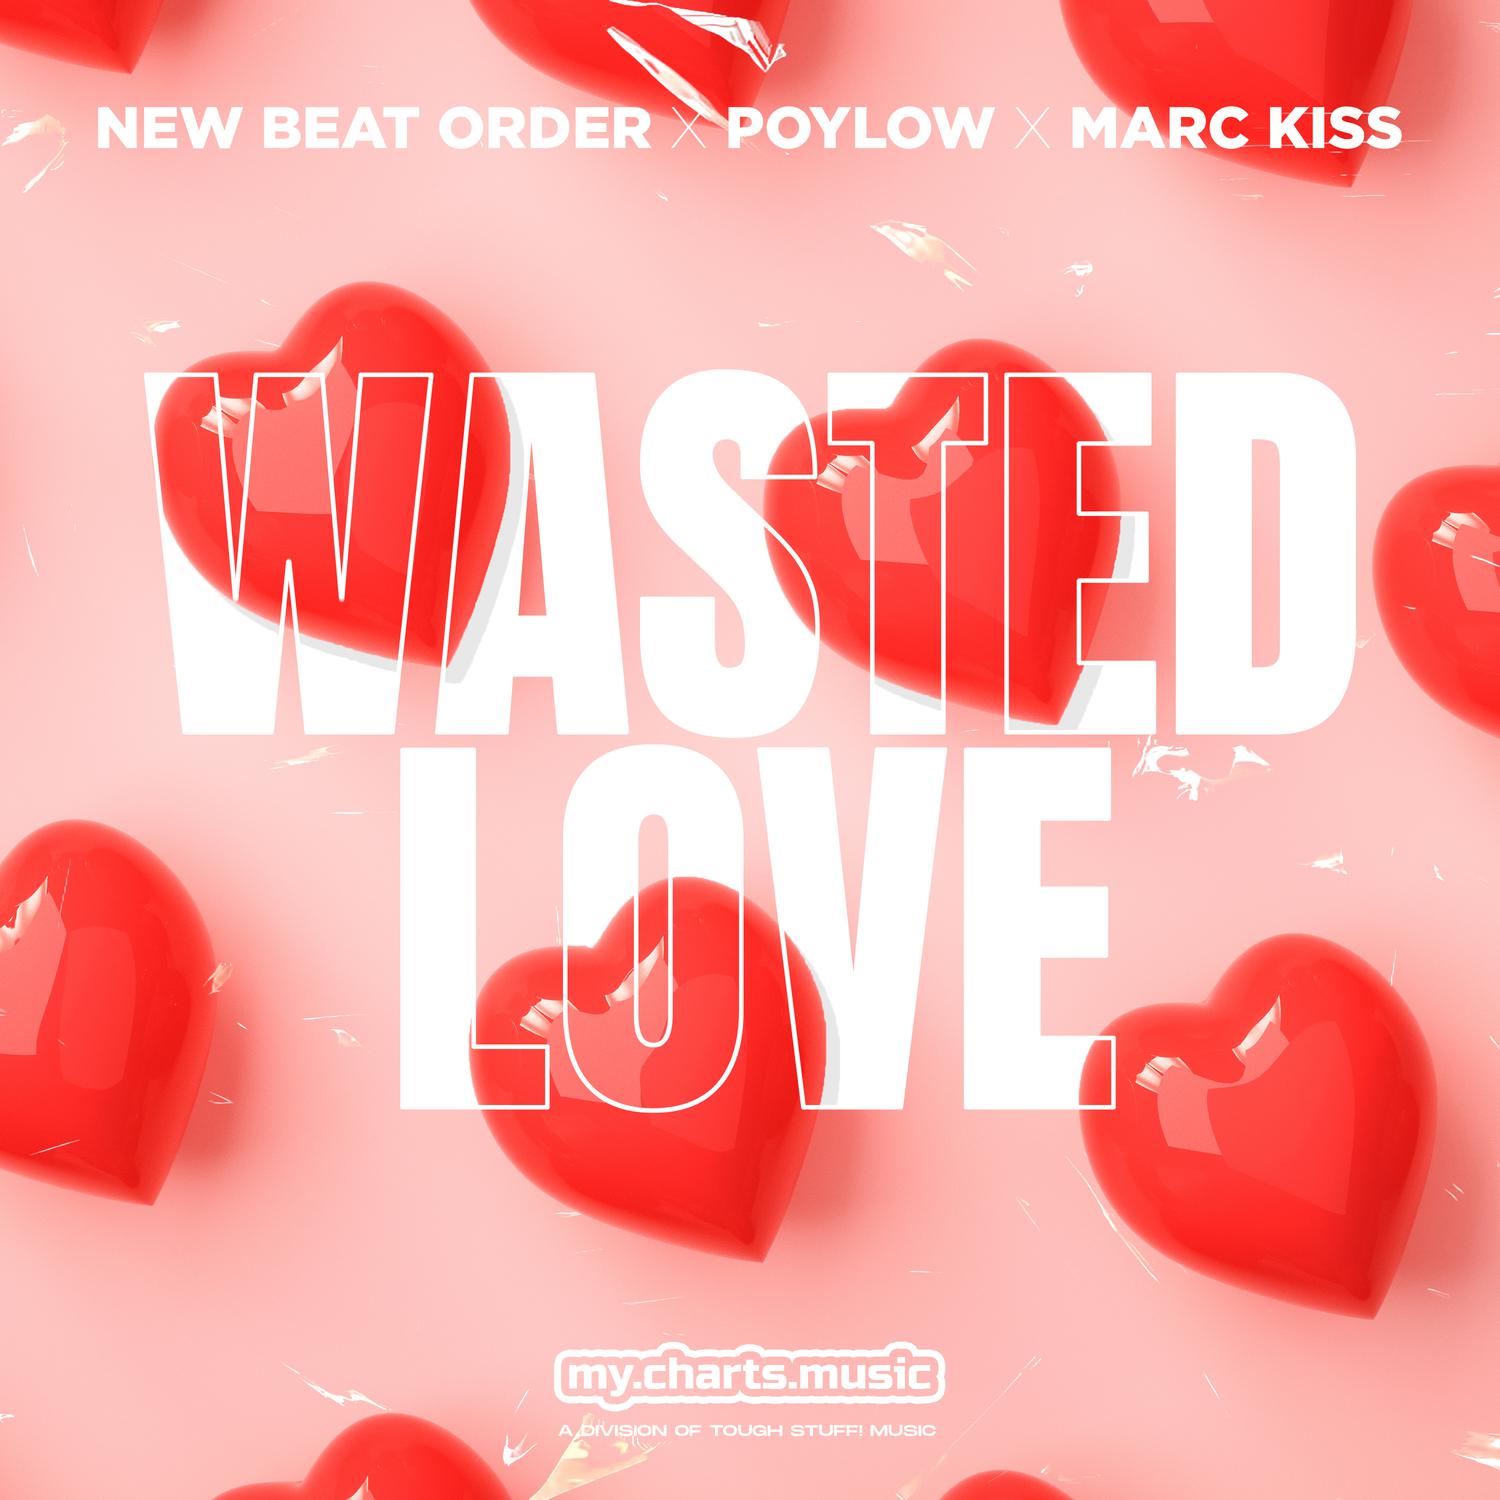 New Beat Order - Wasted Love